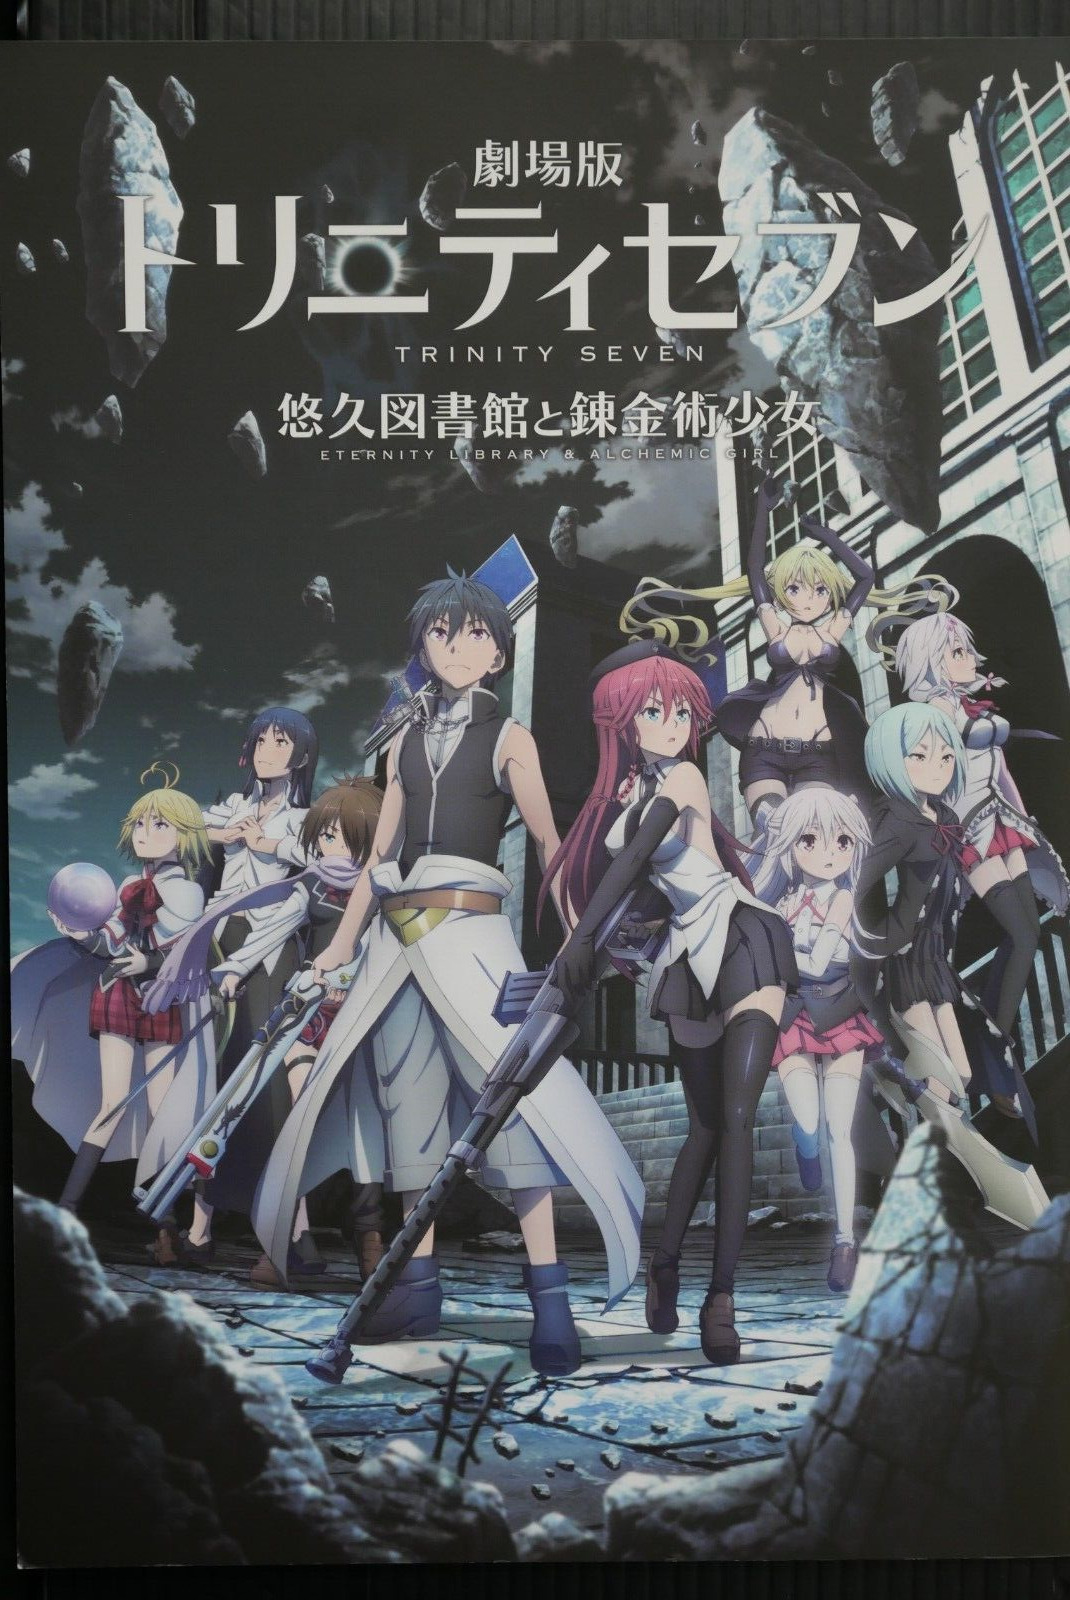 Trinity Seven the Movie: The Eternal Library and the Alchemist Girl Pamphlet